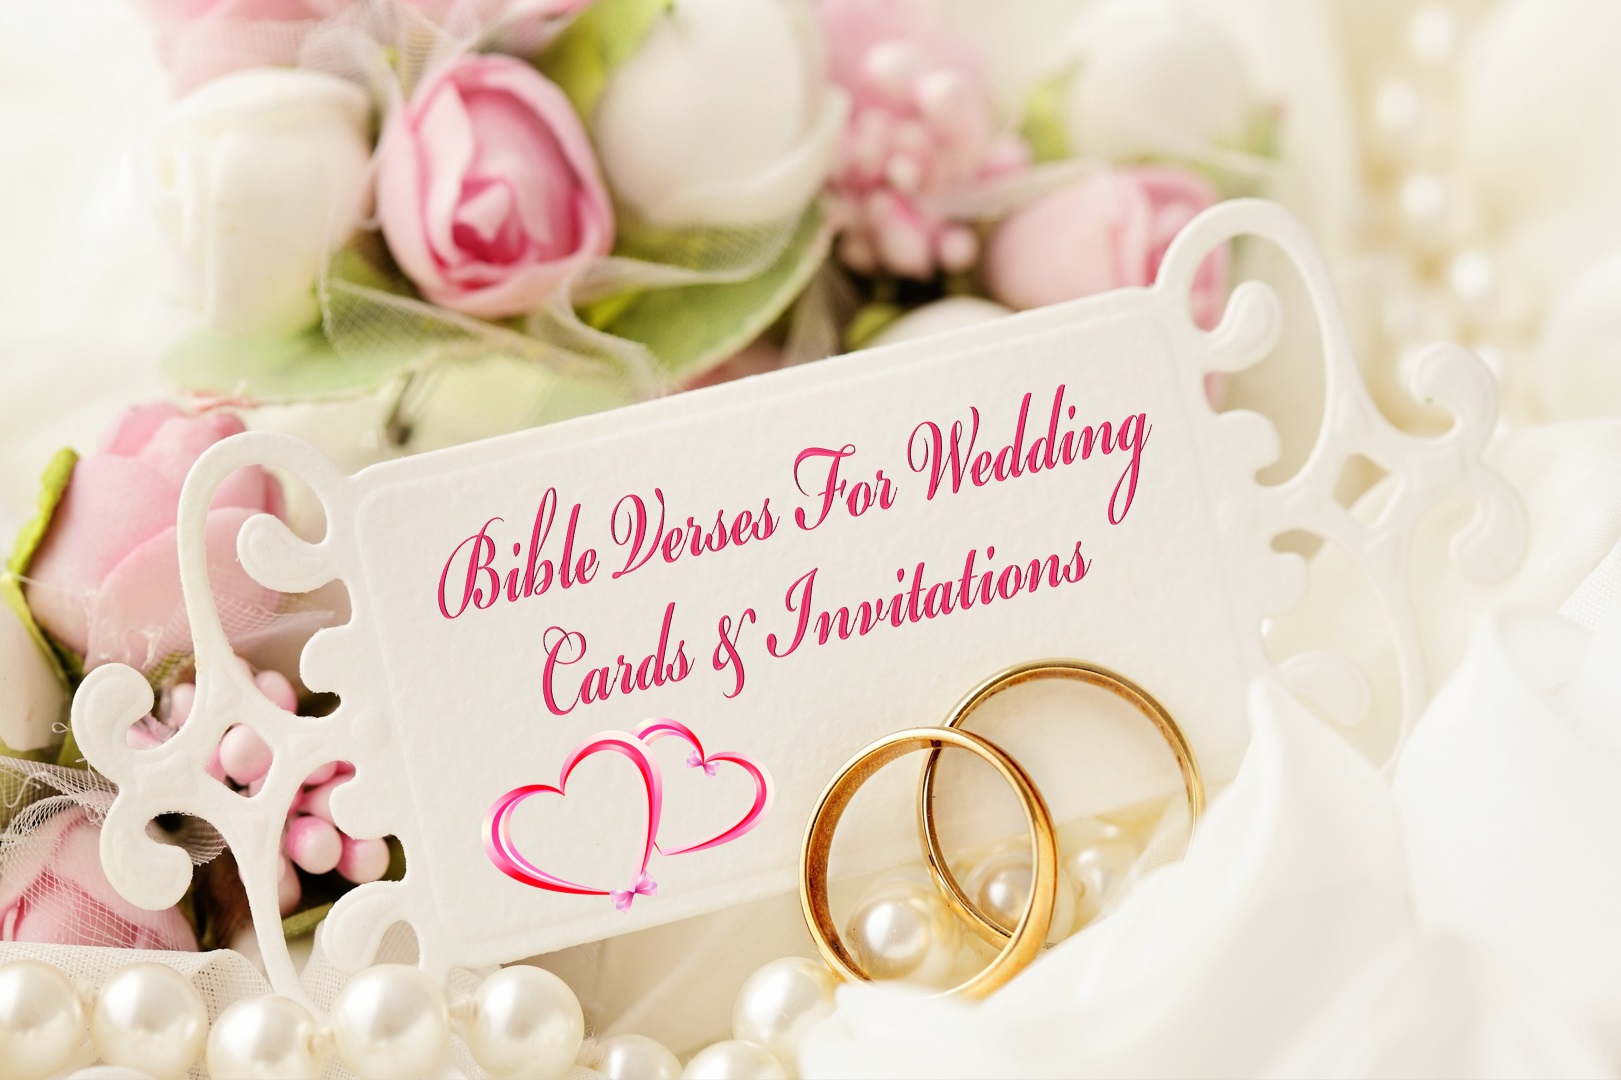 30+ Best Bible Verses For Wedding Cards And Invitations SuperbWIshes